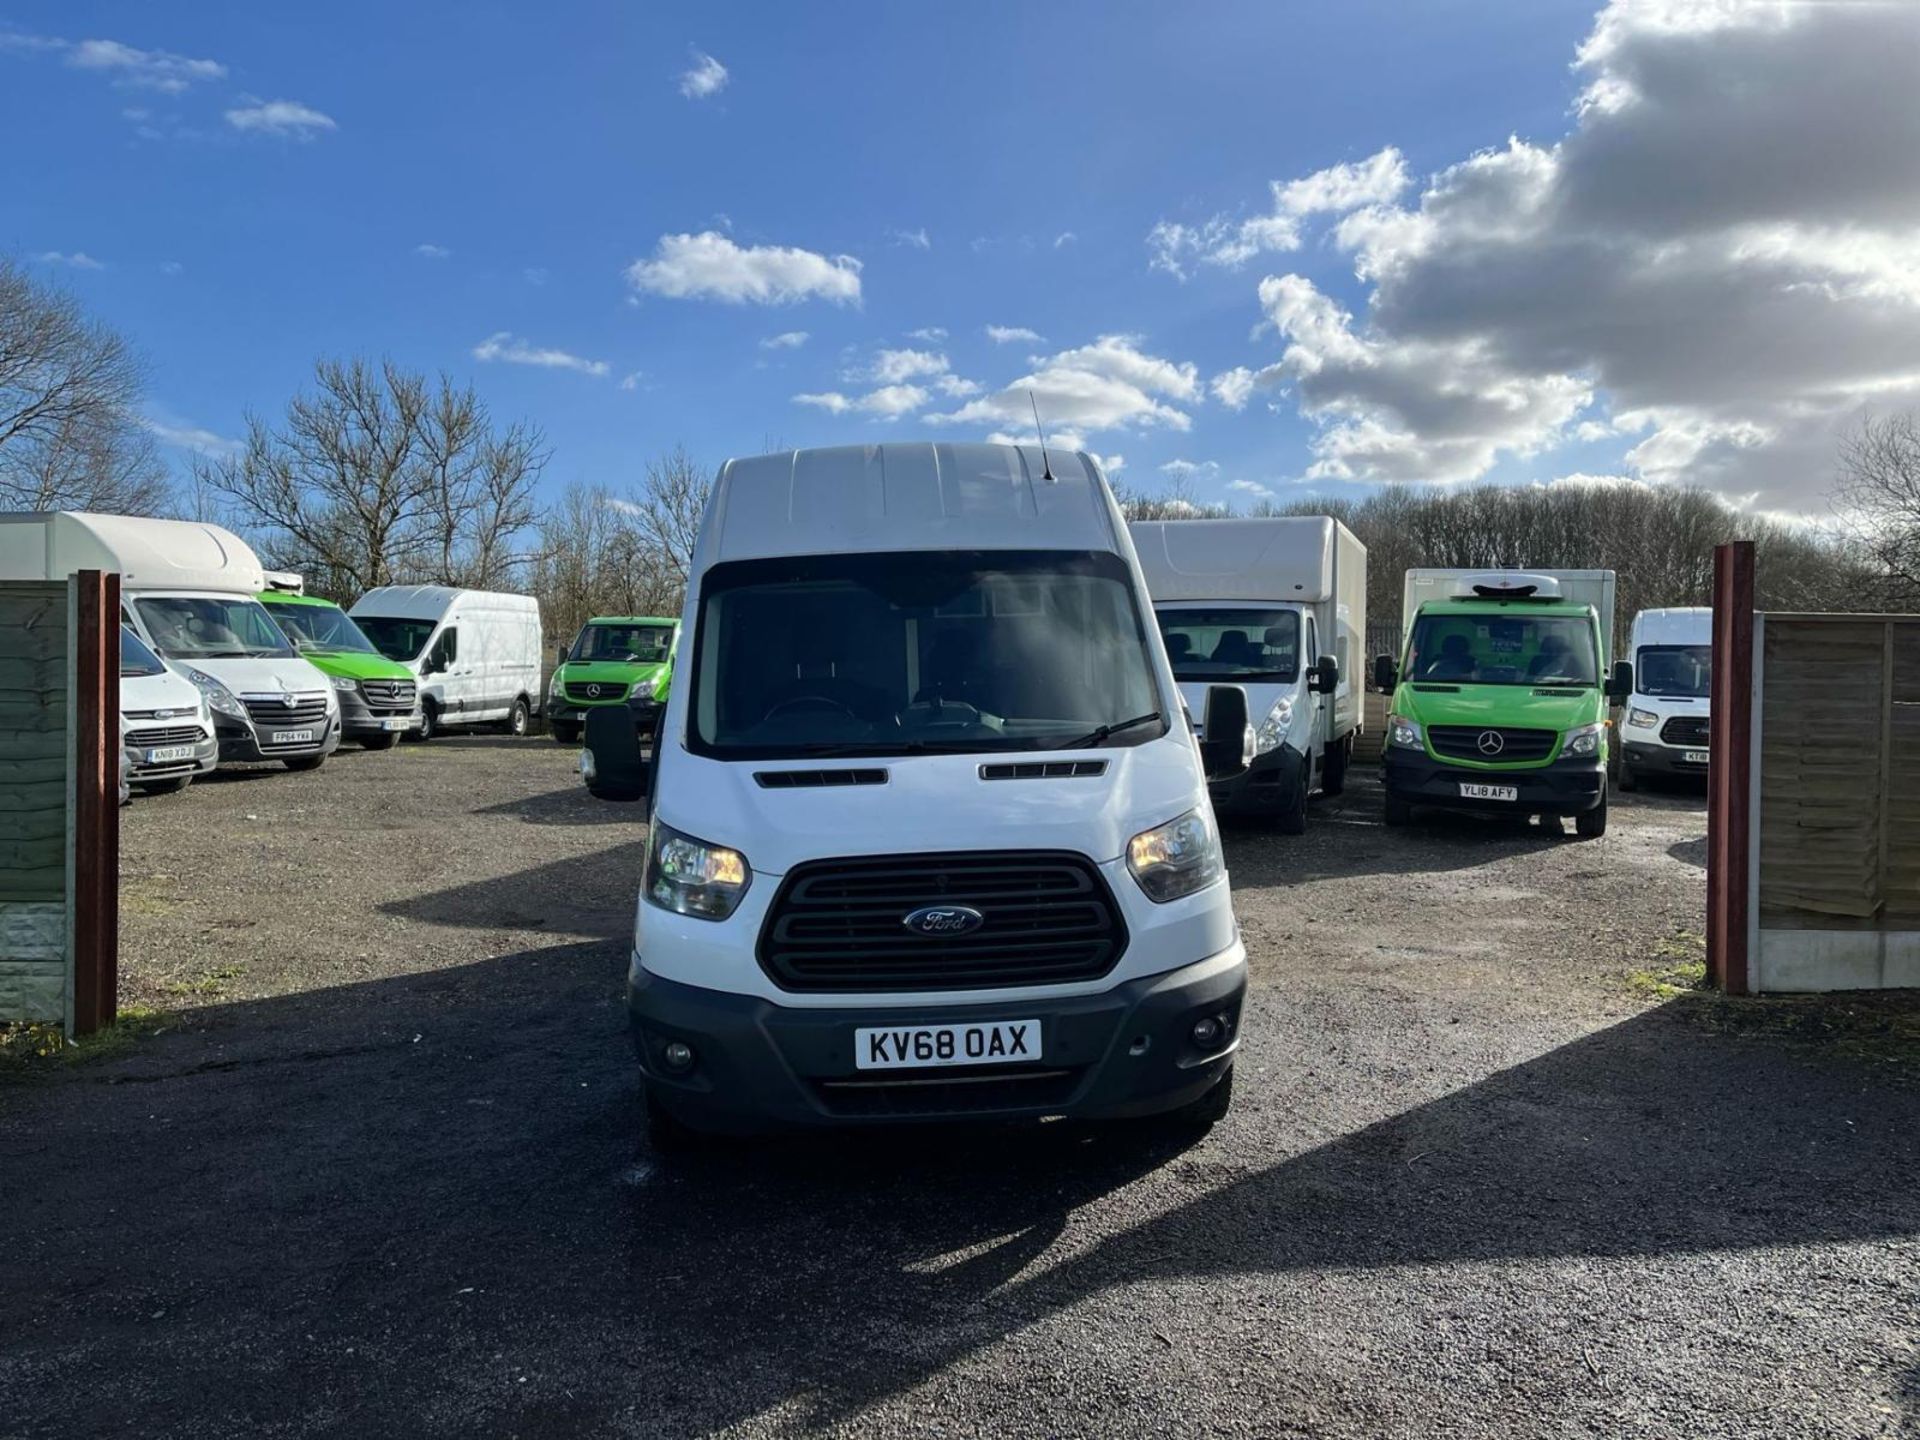 2018 FORD TRANSIT 2.0 TDCI L3 H3: LONG HAUL WORKHORSE - Image 2 of 16